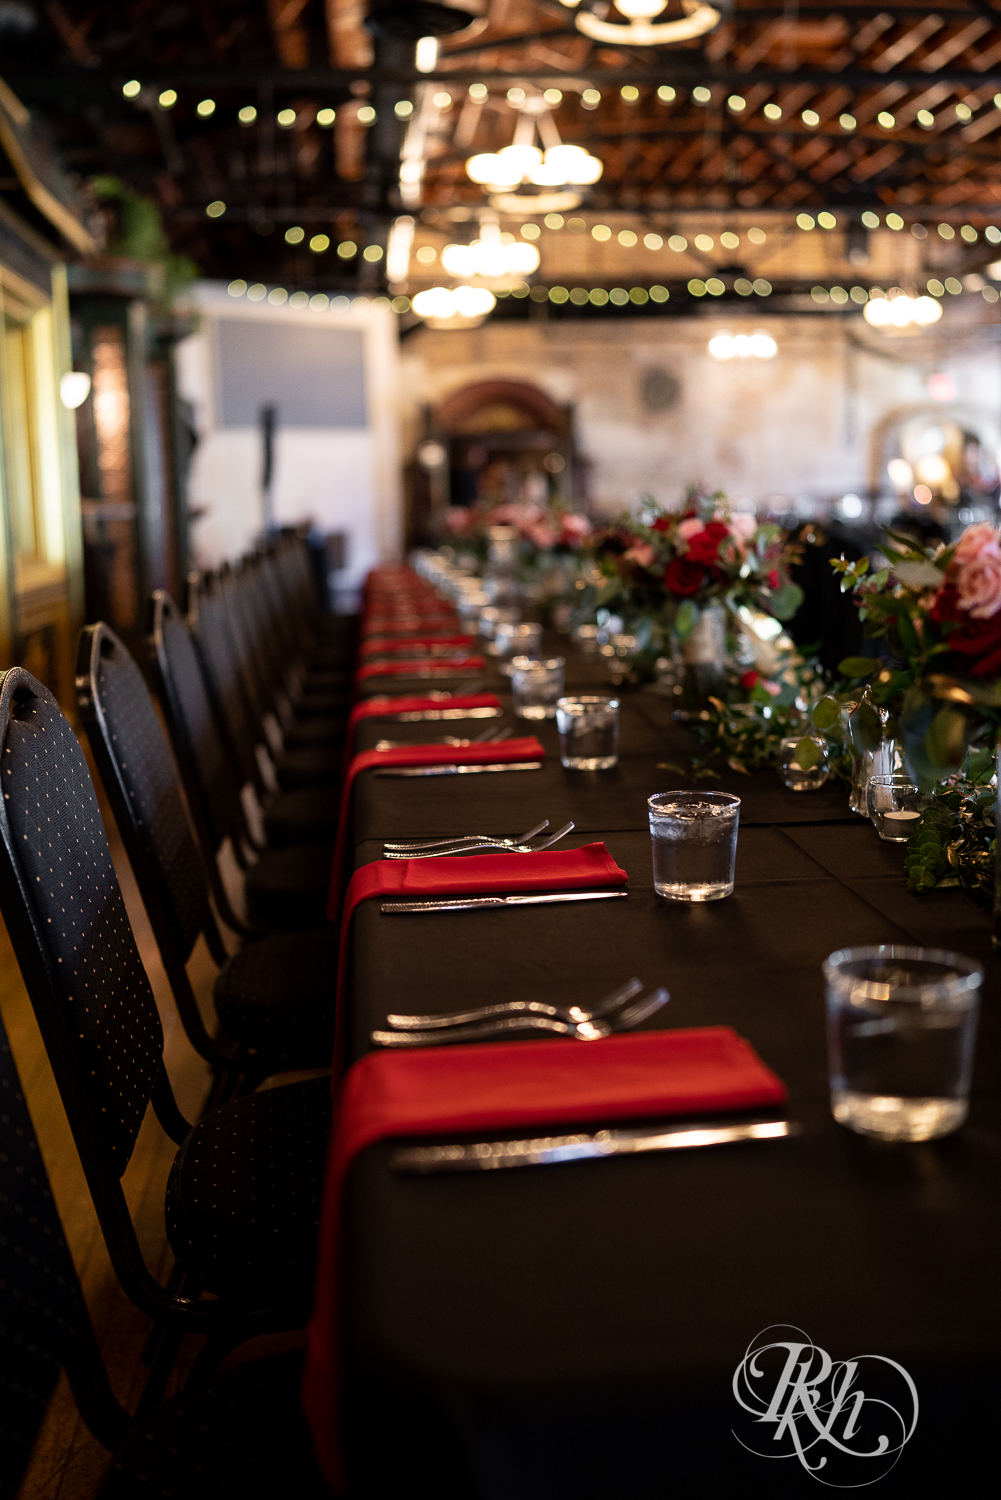 Indoor wedding reception black and red setup at Kellerman's Event Center in White Bear Lake, Minnesota.